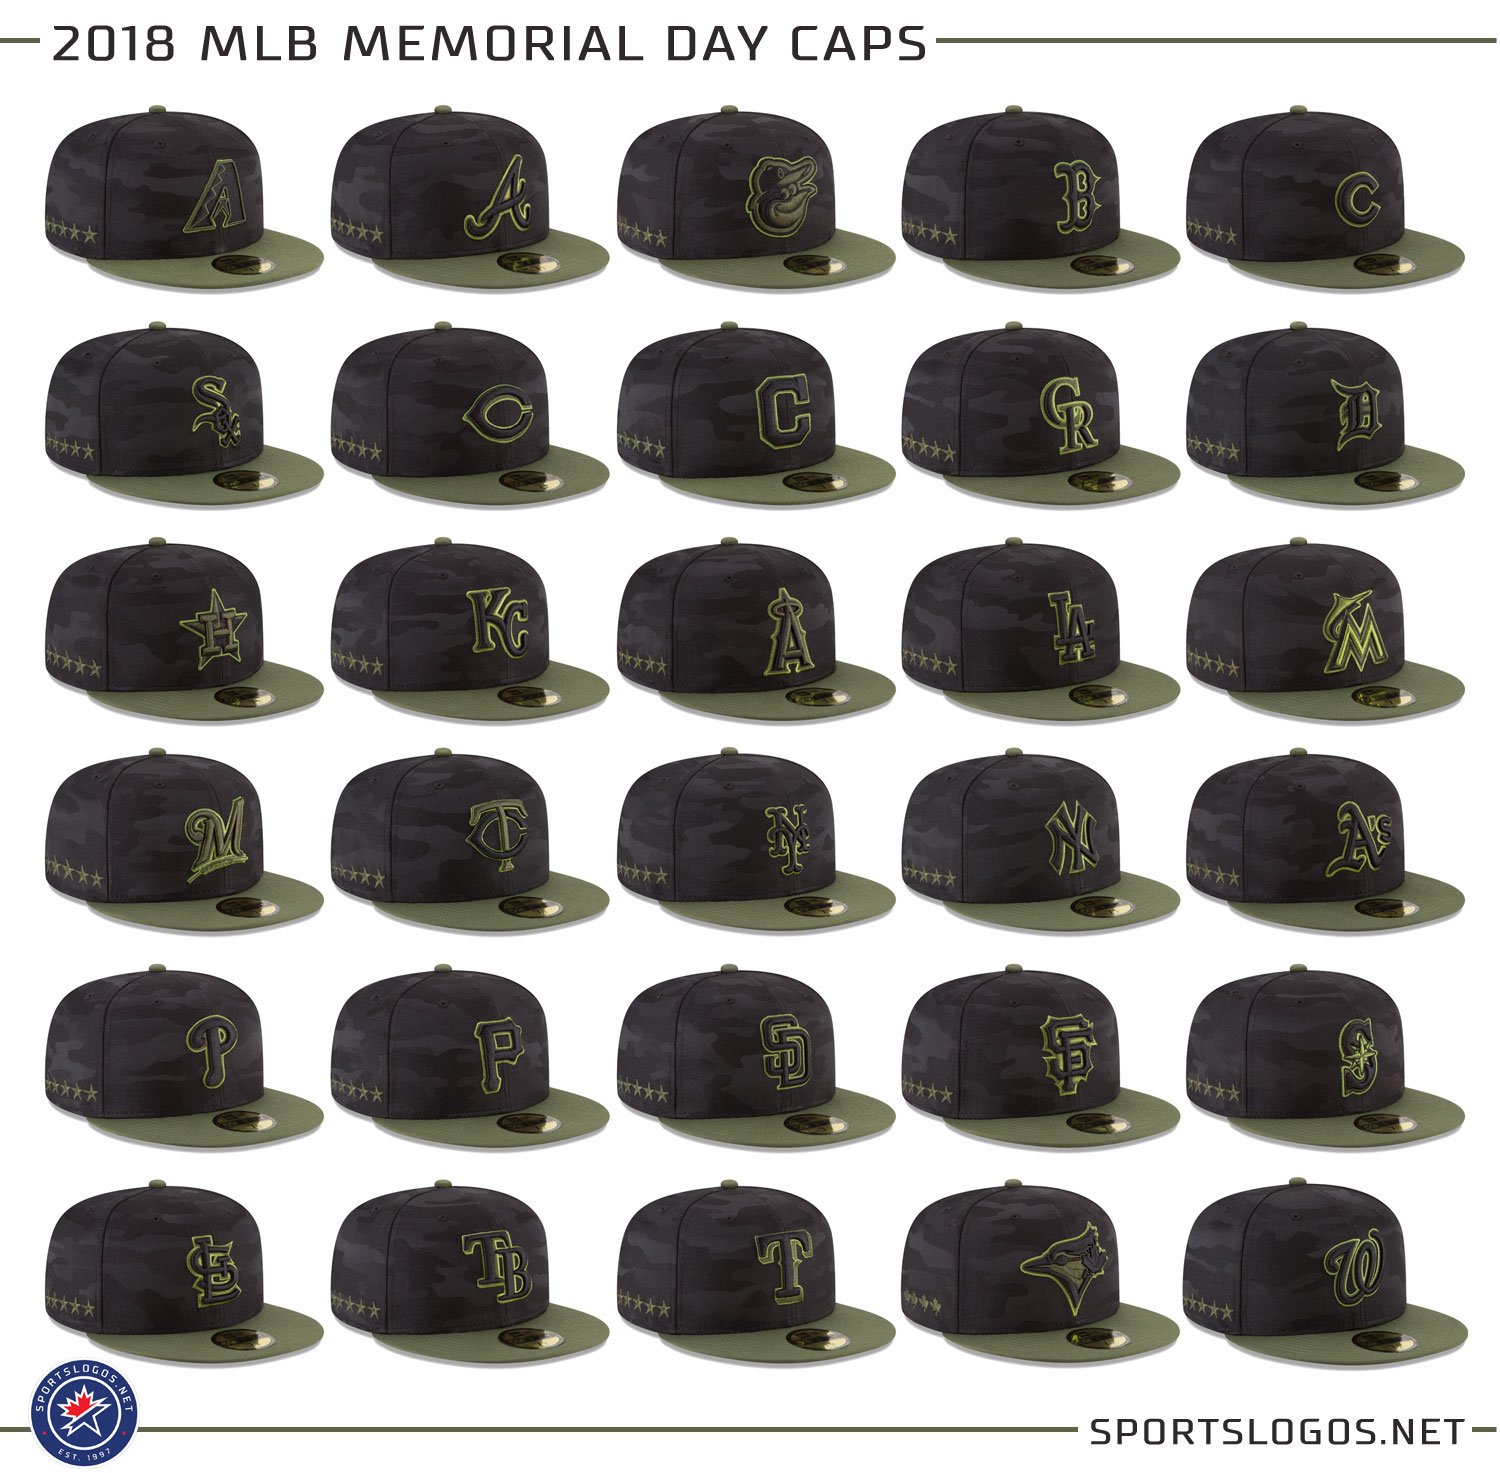 Chris Creamer  SportsLogos.Net on X: It's #MemorialDay weekend which  means once again all 30 #MLB teams will be wearing green and camo uniforms  for their games today, tomorrow, and Monday. Here's